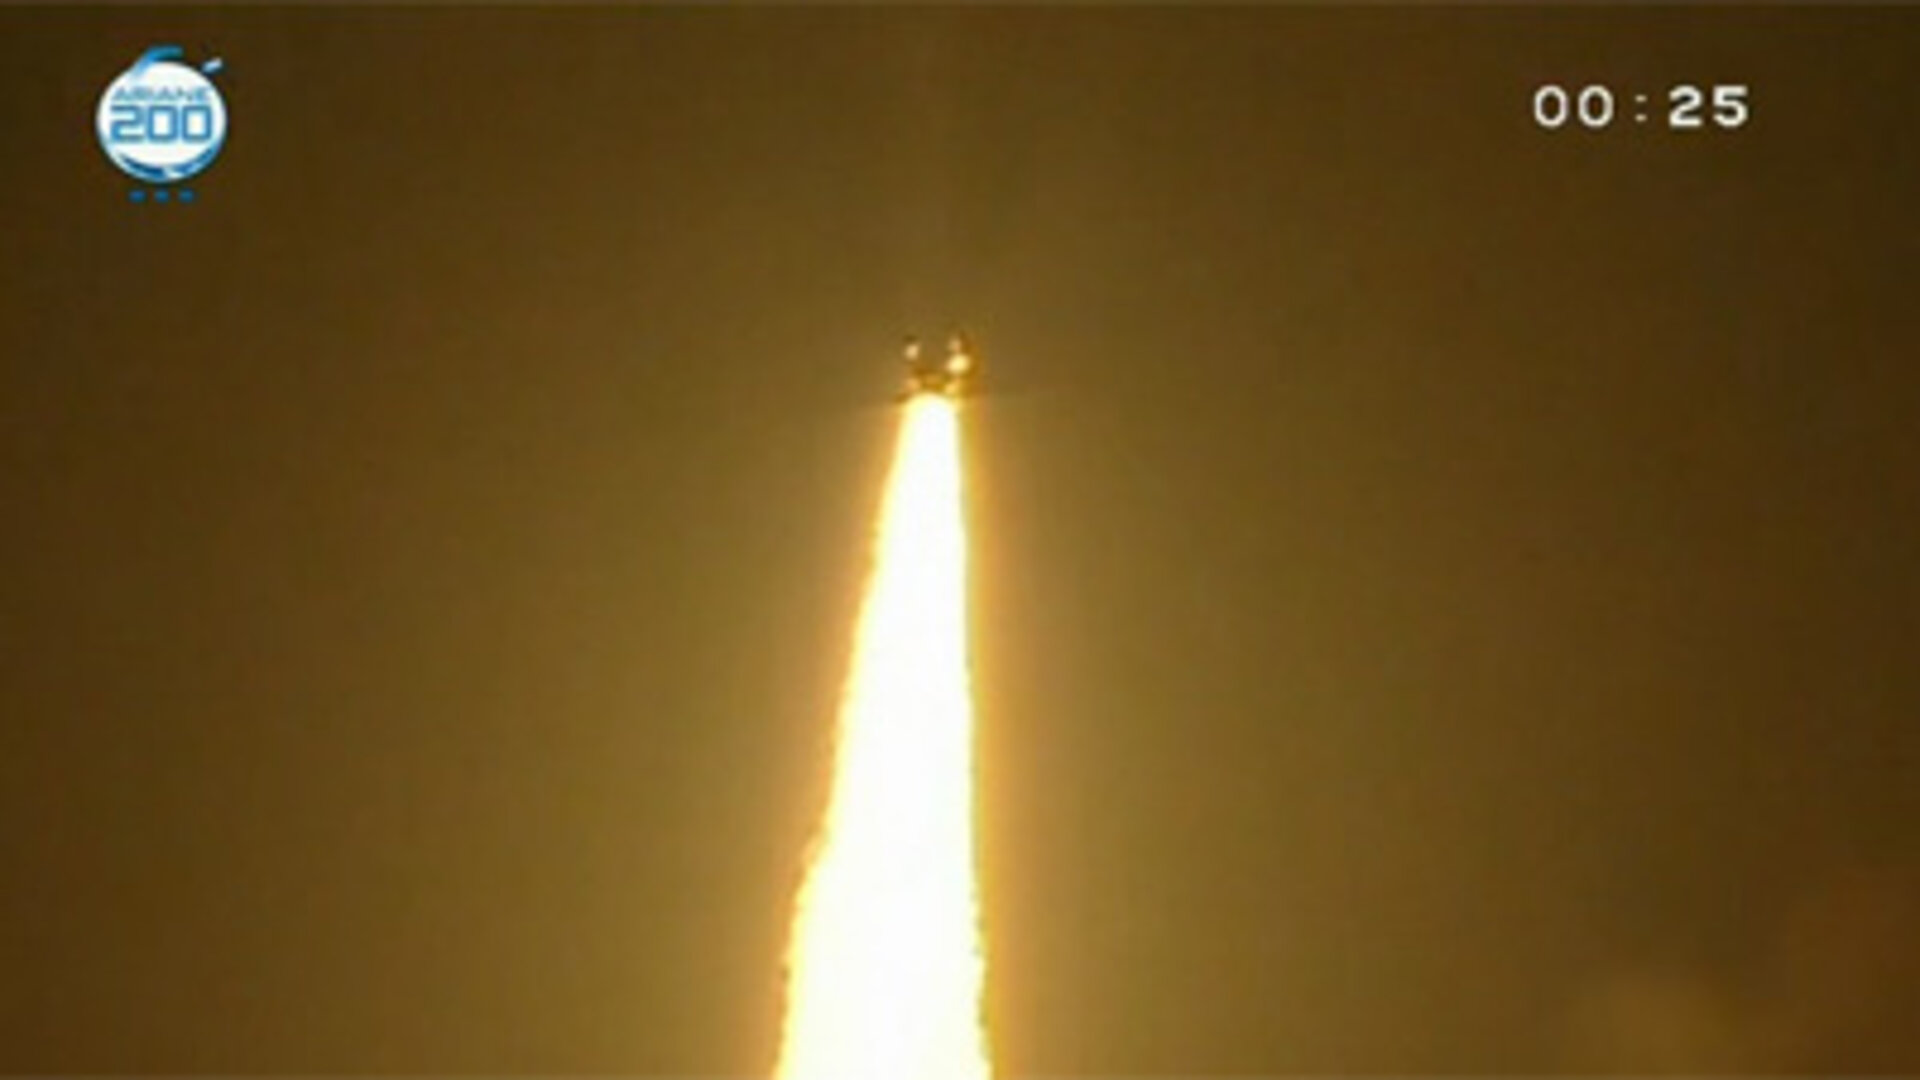 Launch of the Ariane 5 with ATV Johannes Kepler